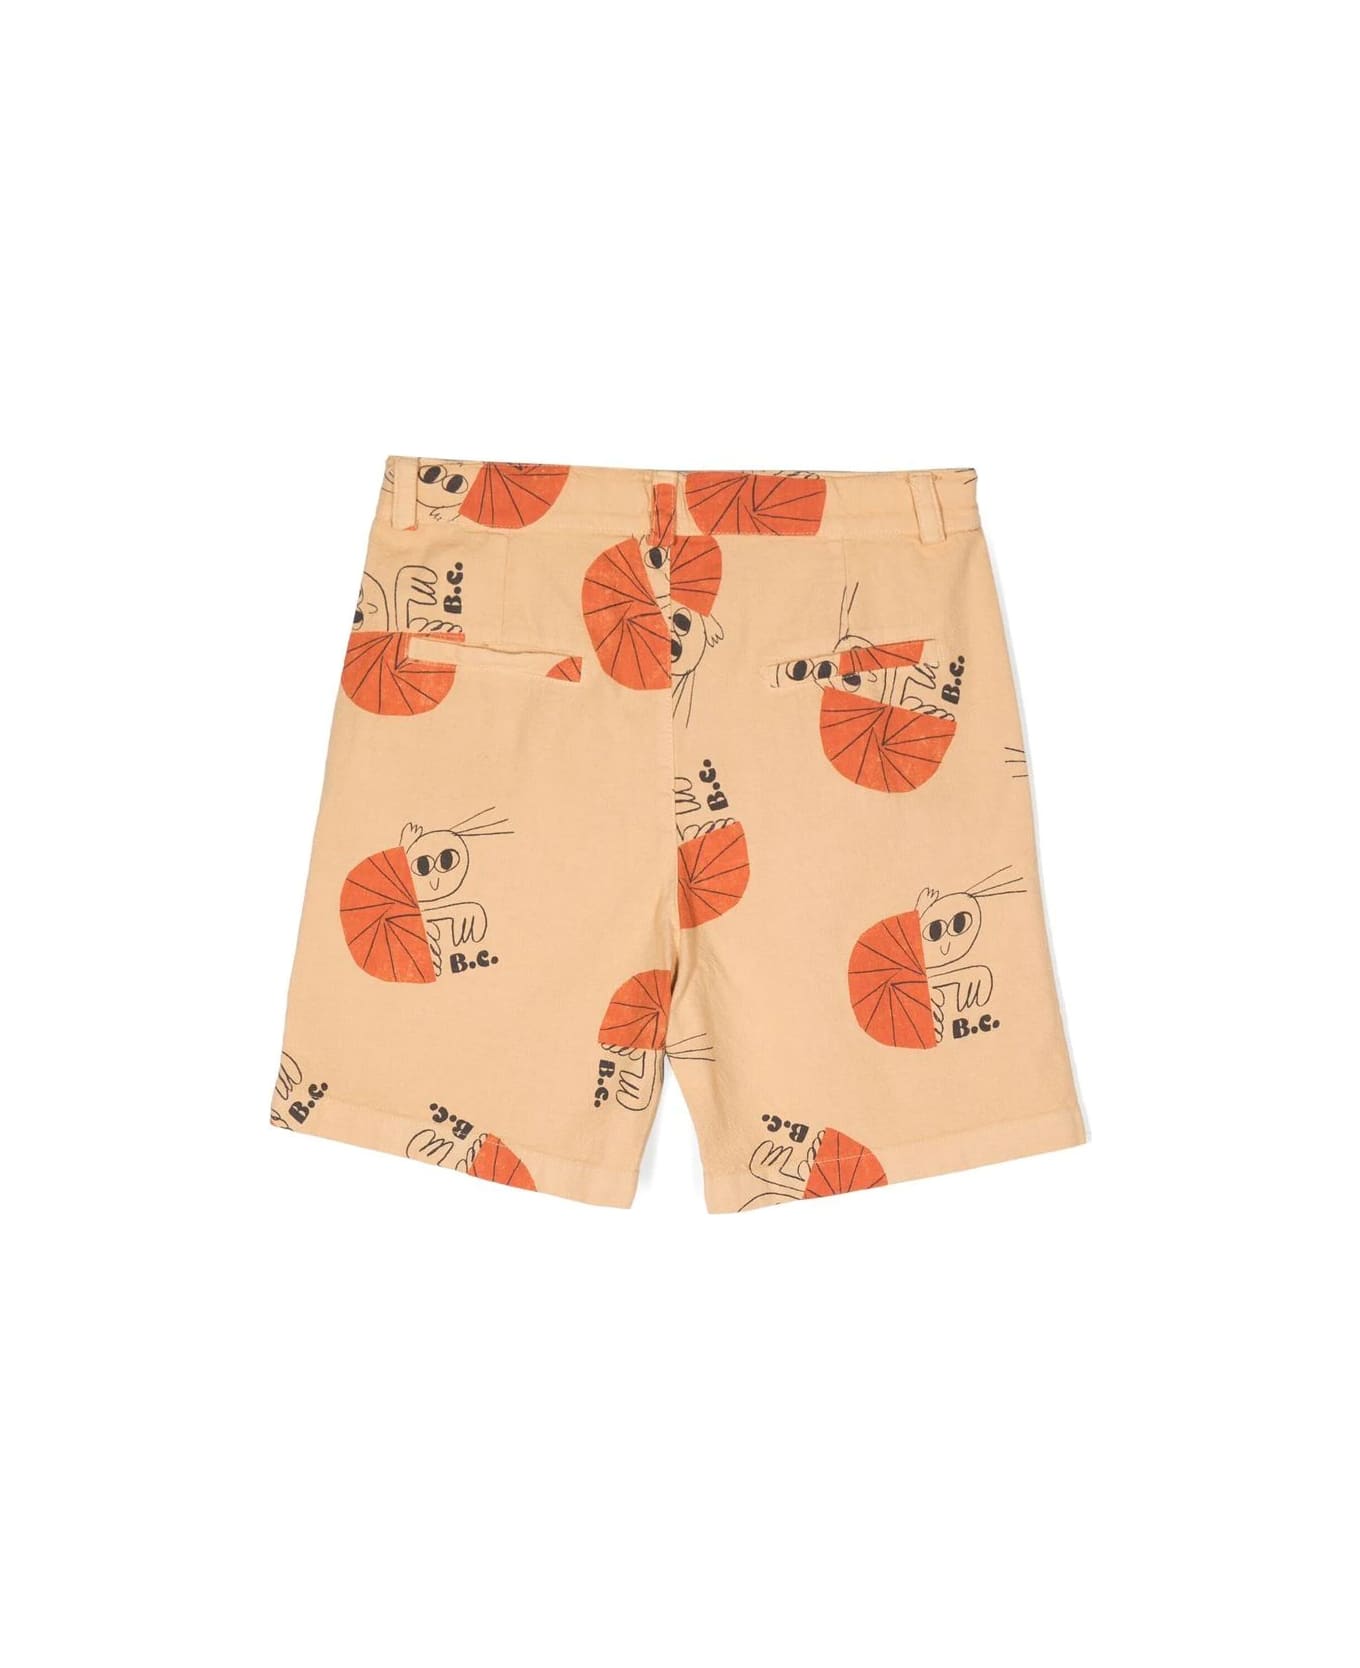 Bobo Choses Hermit Crab All Over Woven Shorts - Multi